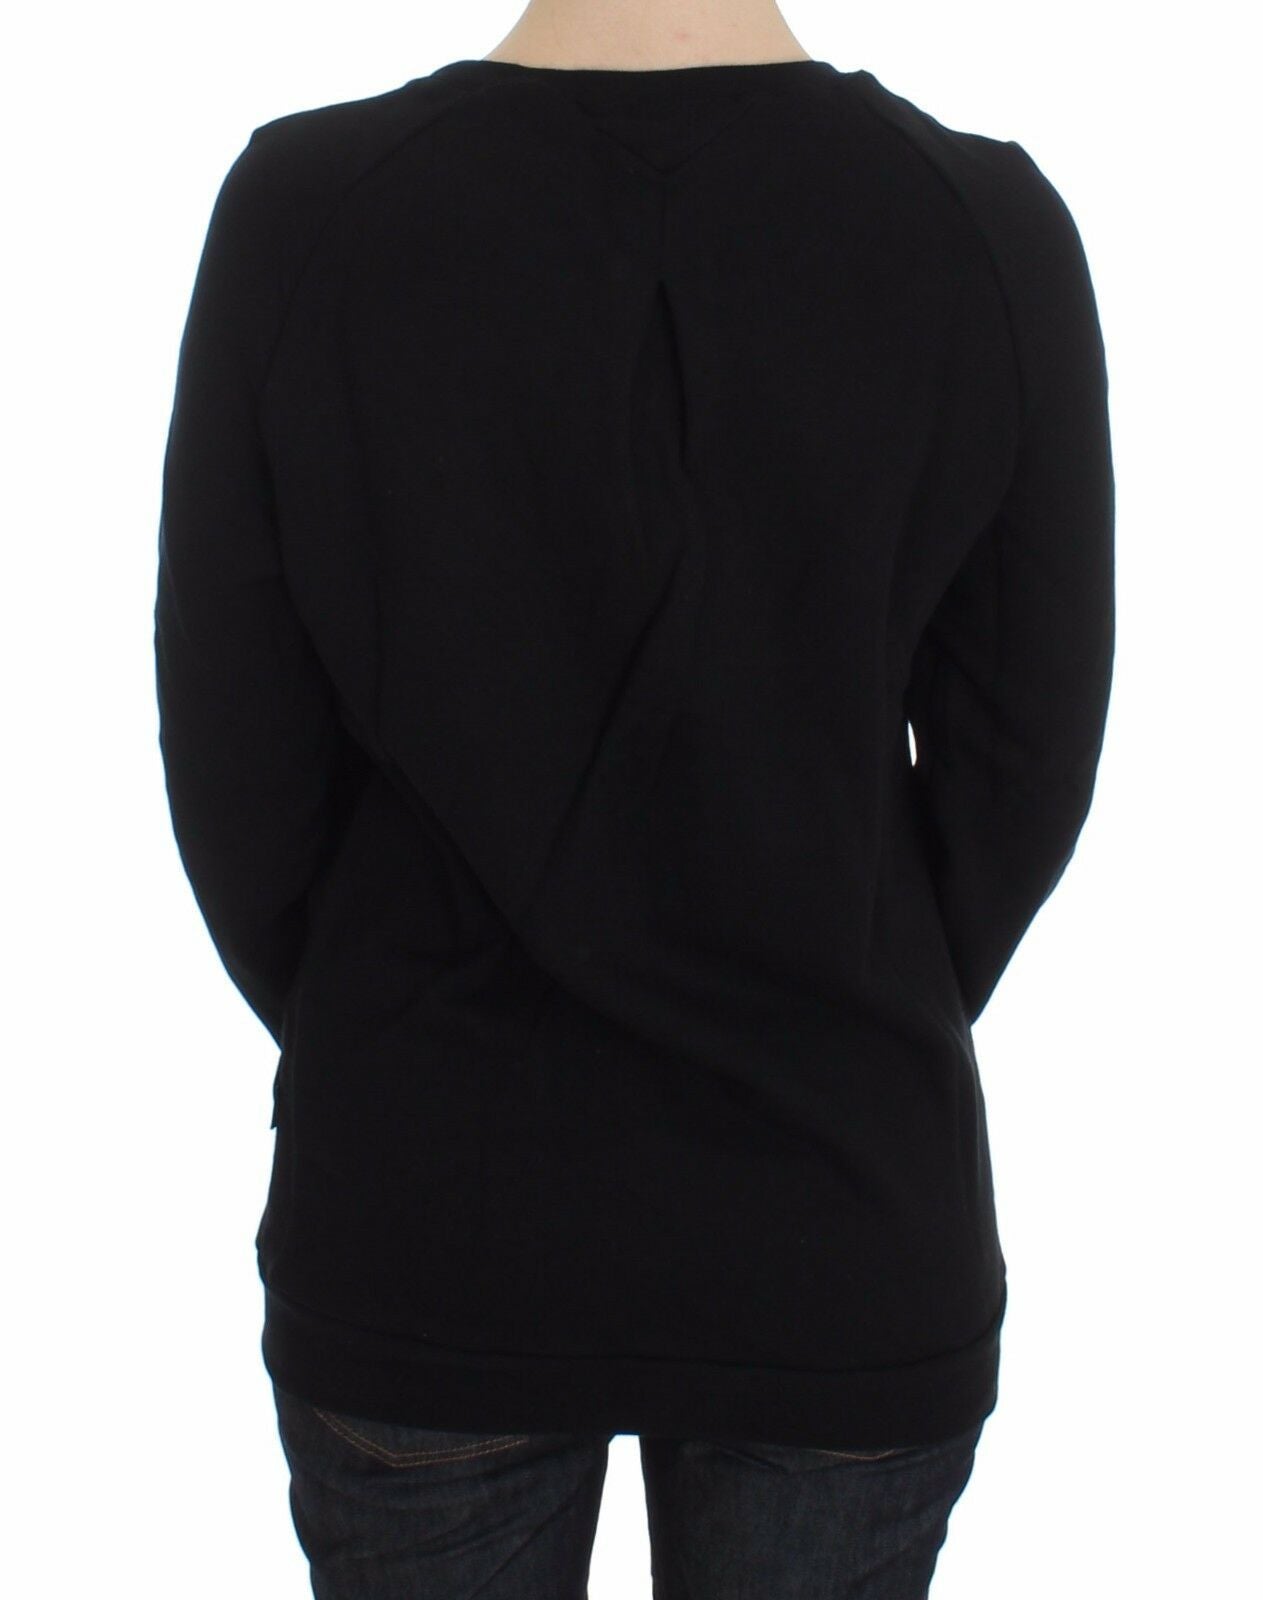 Black Cotton Motive Print Crewneck Pullover Sweater - Designed by Exte Available to Buy at a Discounted Price on Moon Behind The Hill Online Designer Discount Store